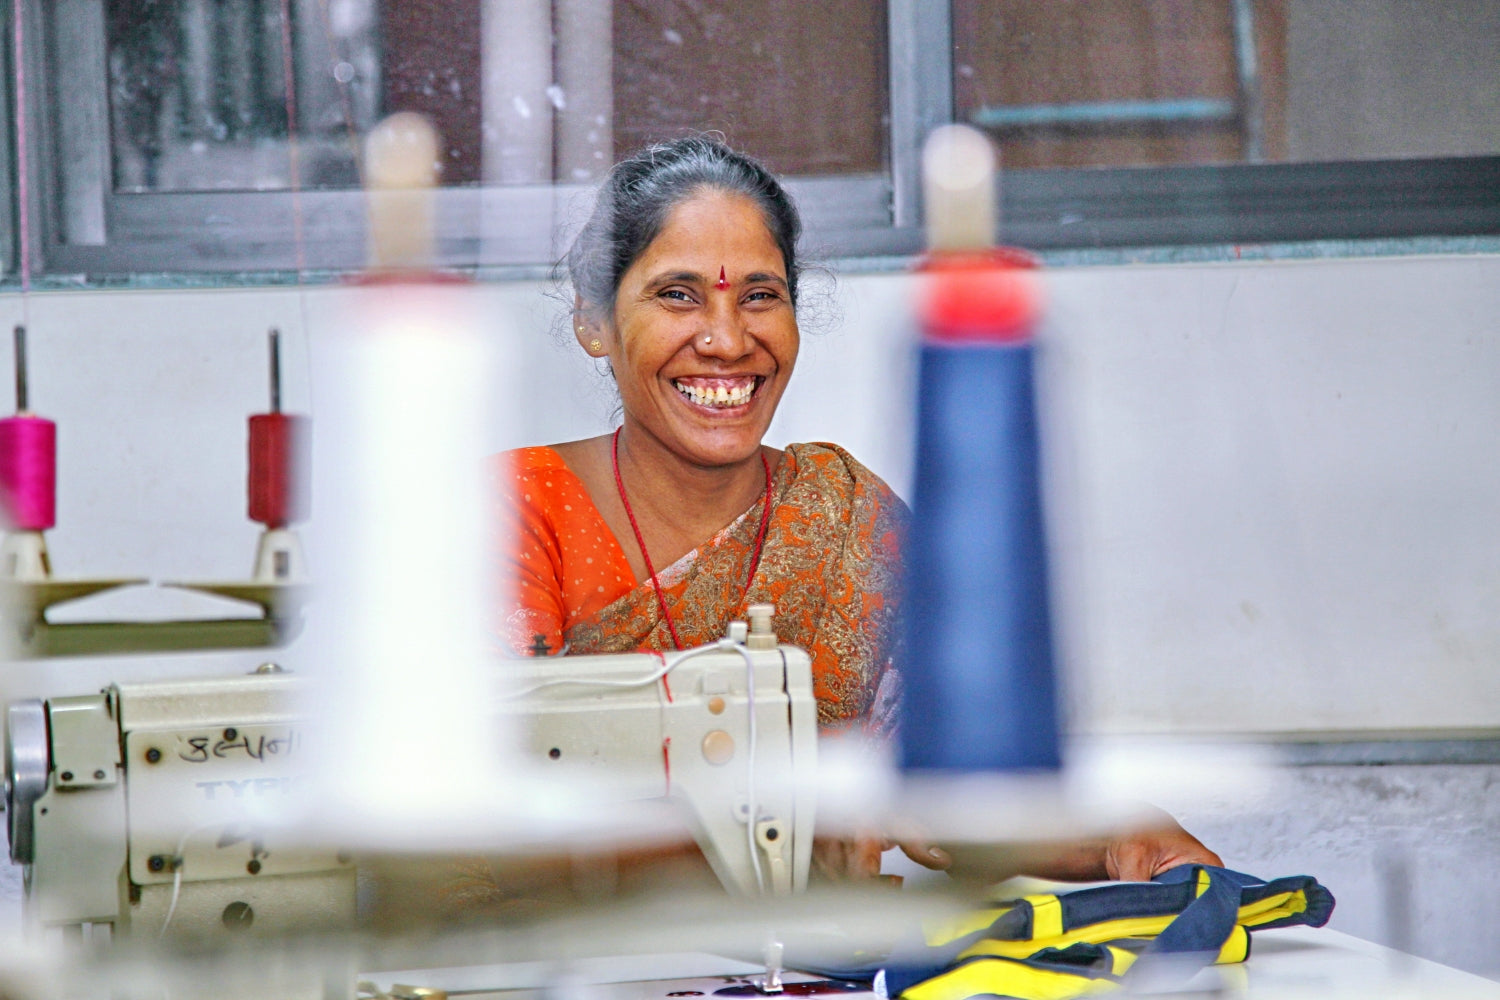 EcoRight artisans skillfully sewing eco-friendly bags with a big smile, focus on quality and sustainable craftsmanship